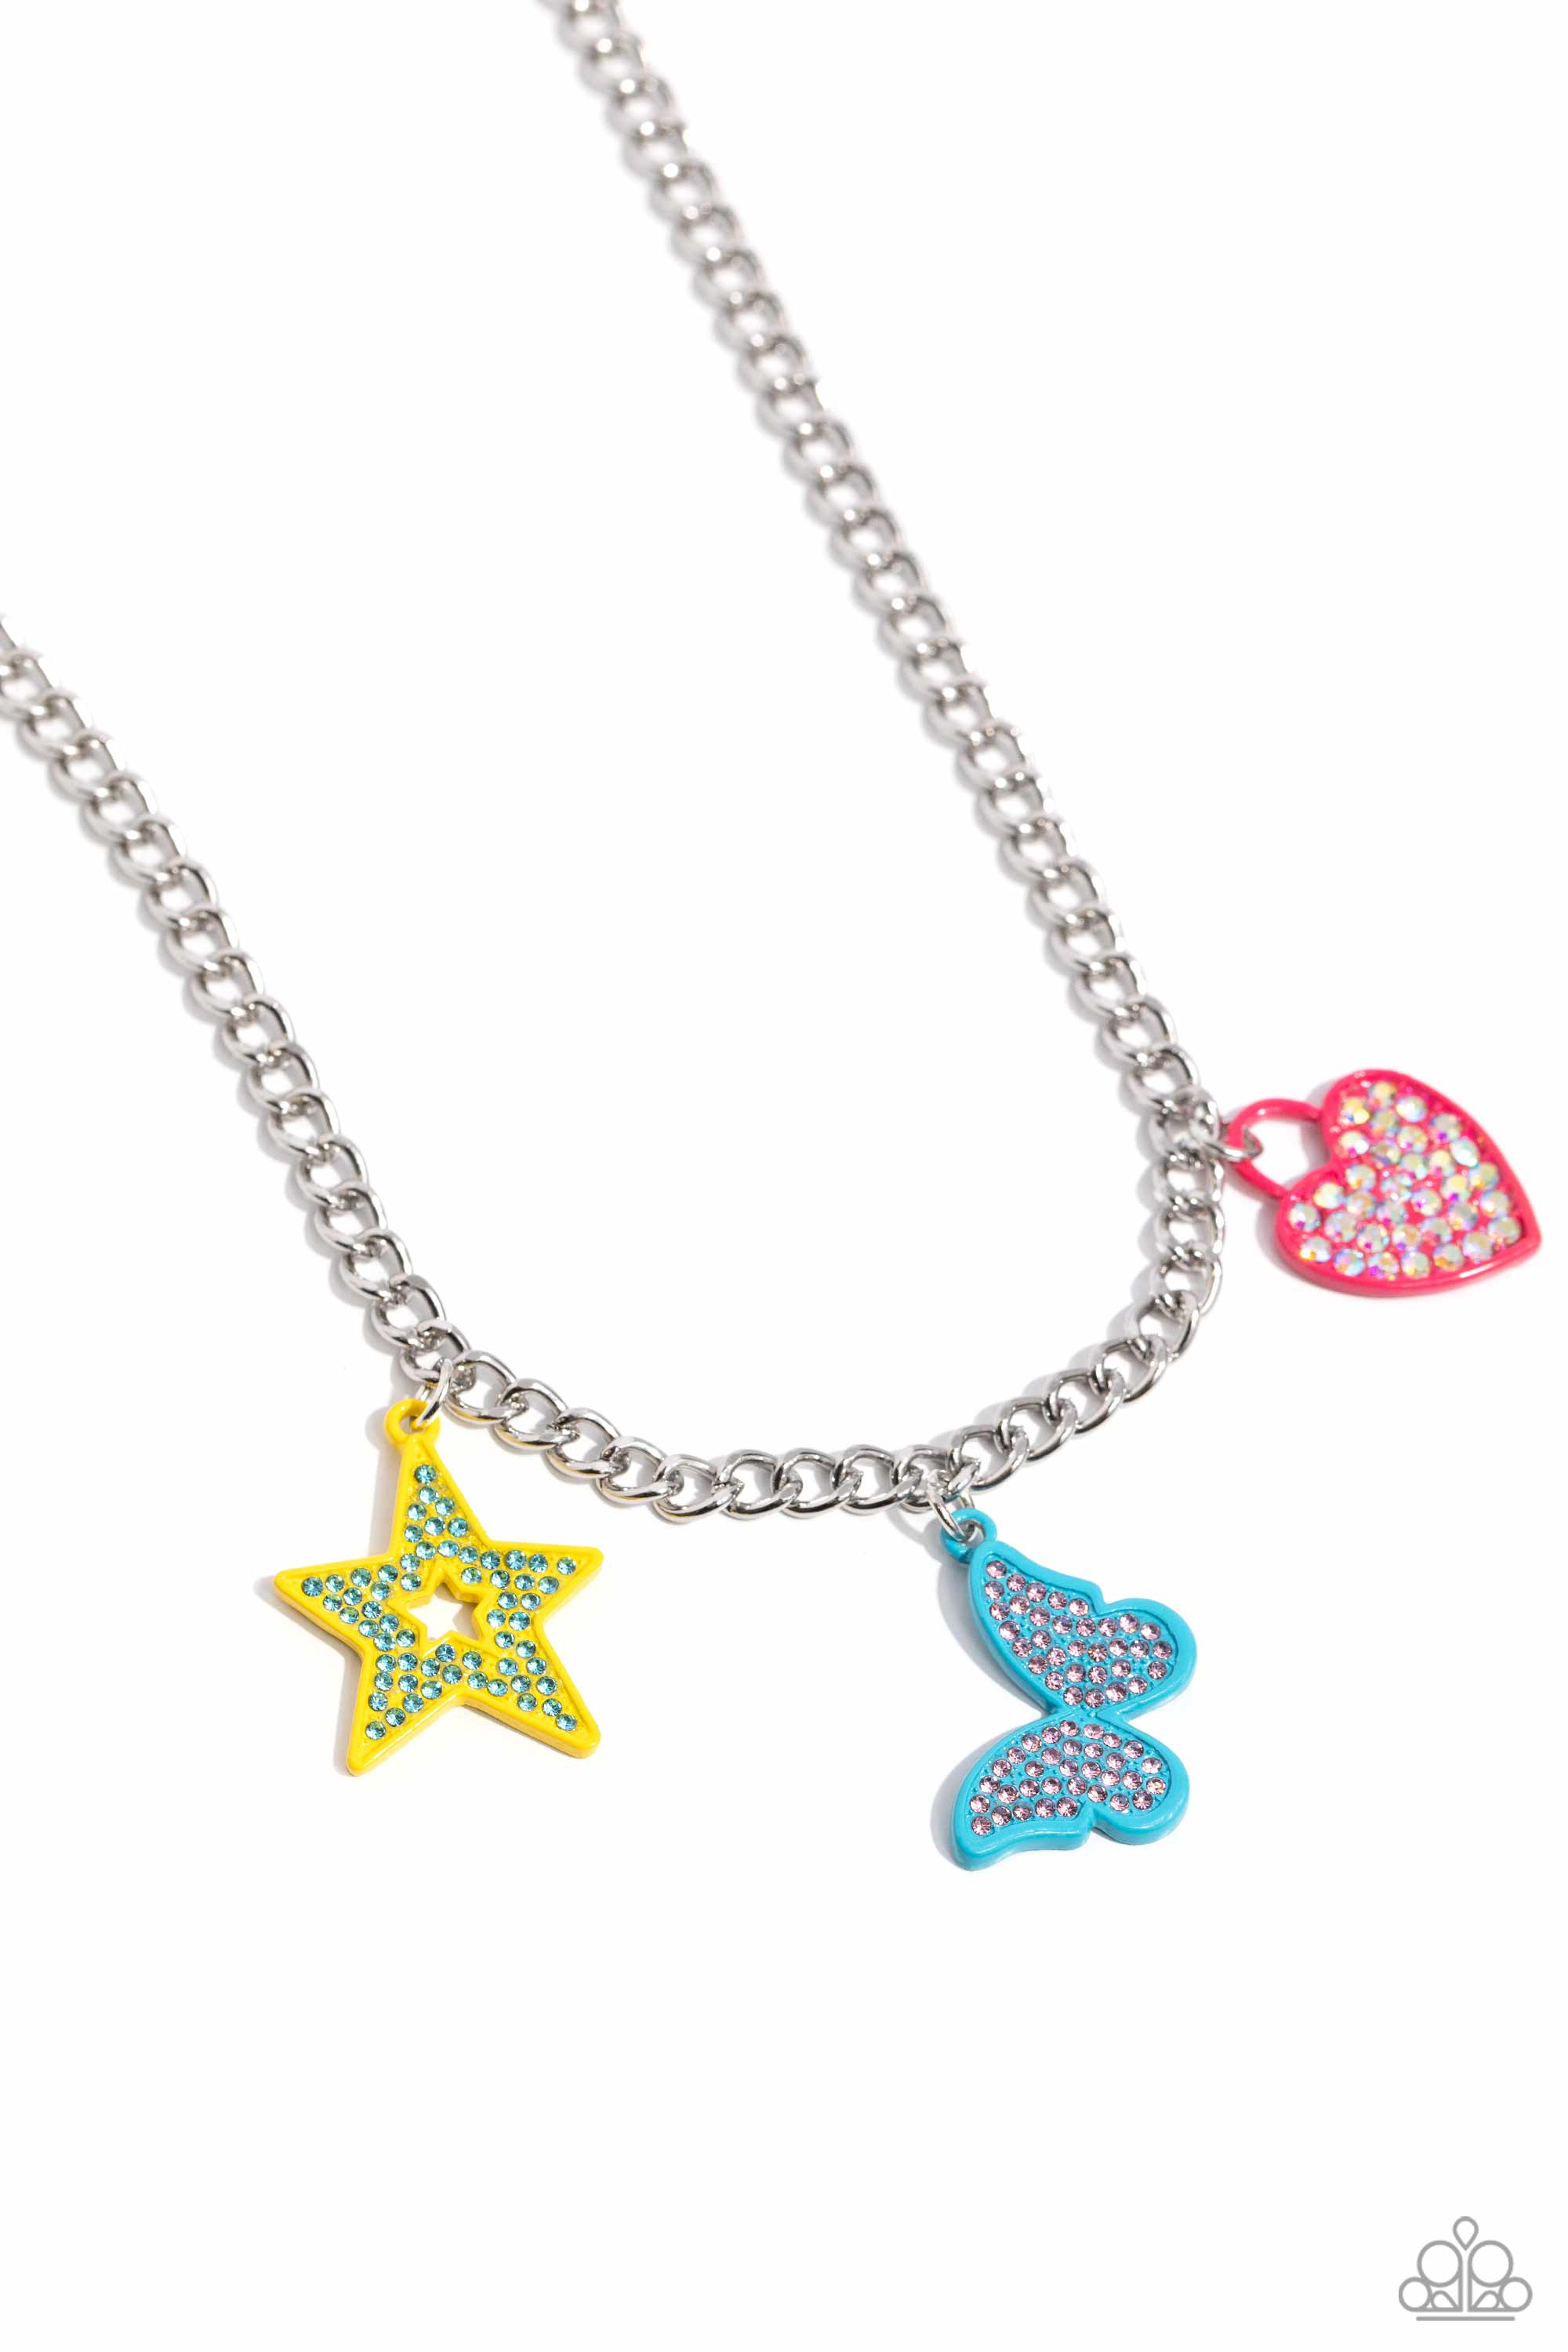 Sensational Shapes Multi Charm Necklace - Paparazzi Accessories- lightbox - CarasShop.com - $5 Jewelry by Cara Jewels